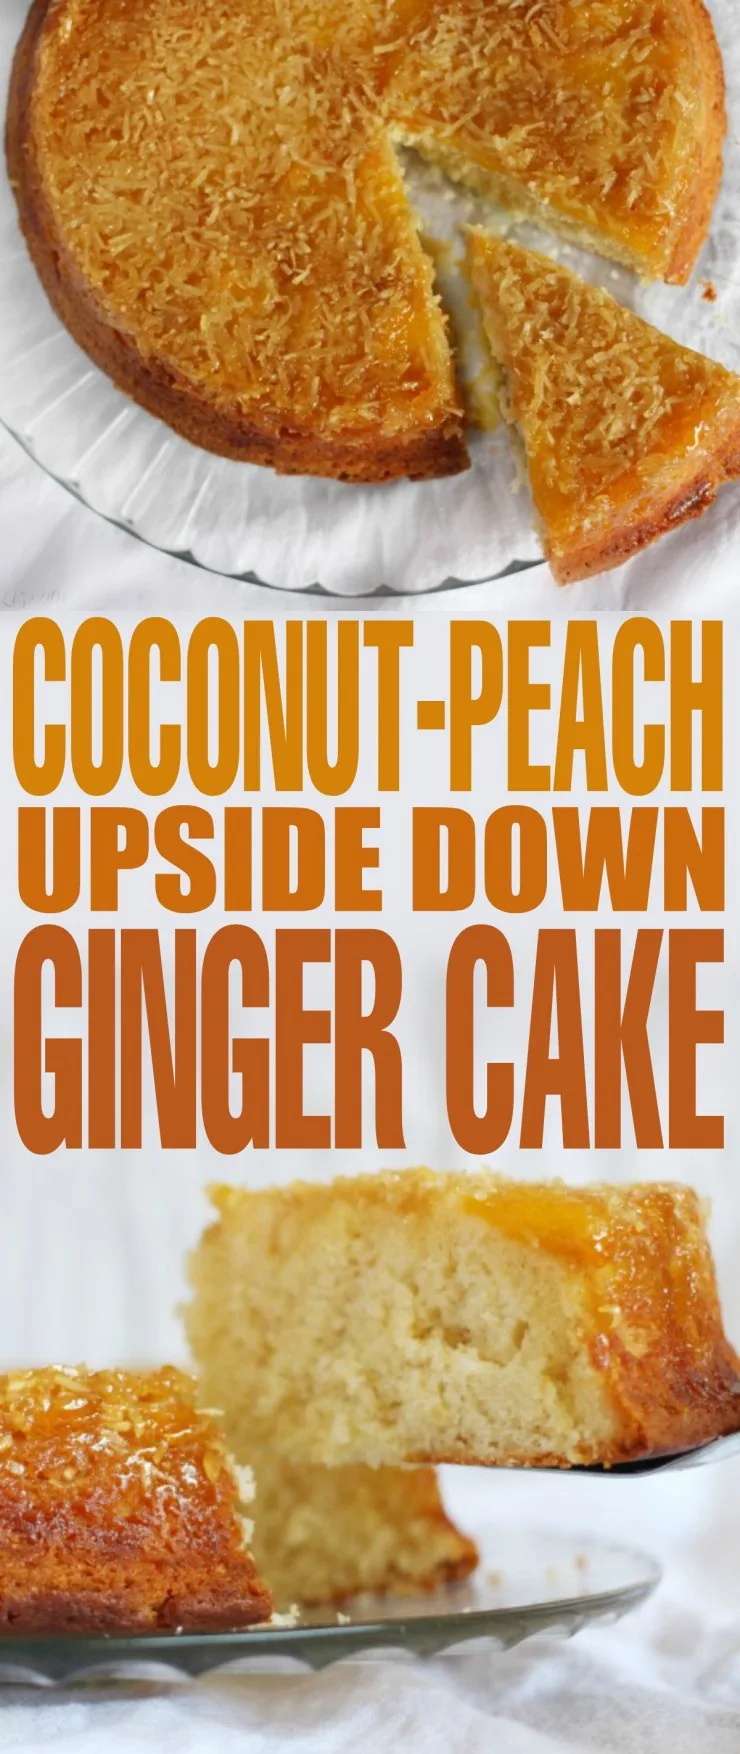 This Coconut-Peach Upside Down Ginger Cake is a scrumptuous summer dessert recipe that will have everyone coming back for more!